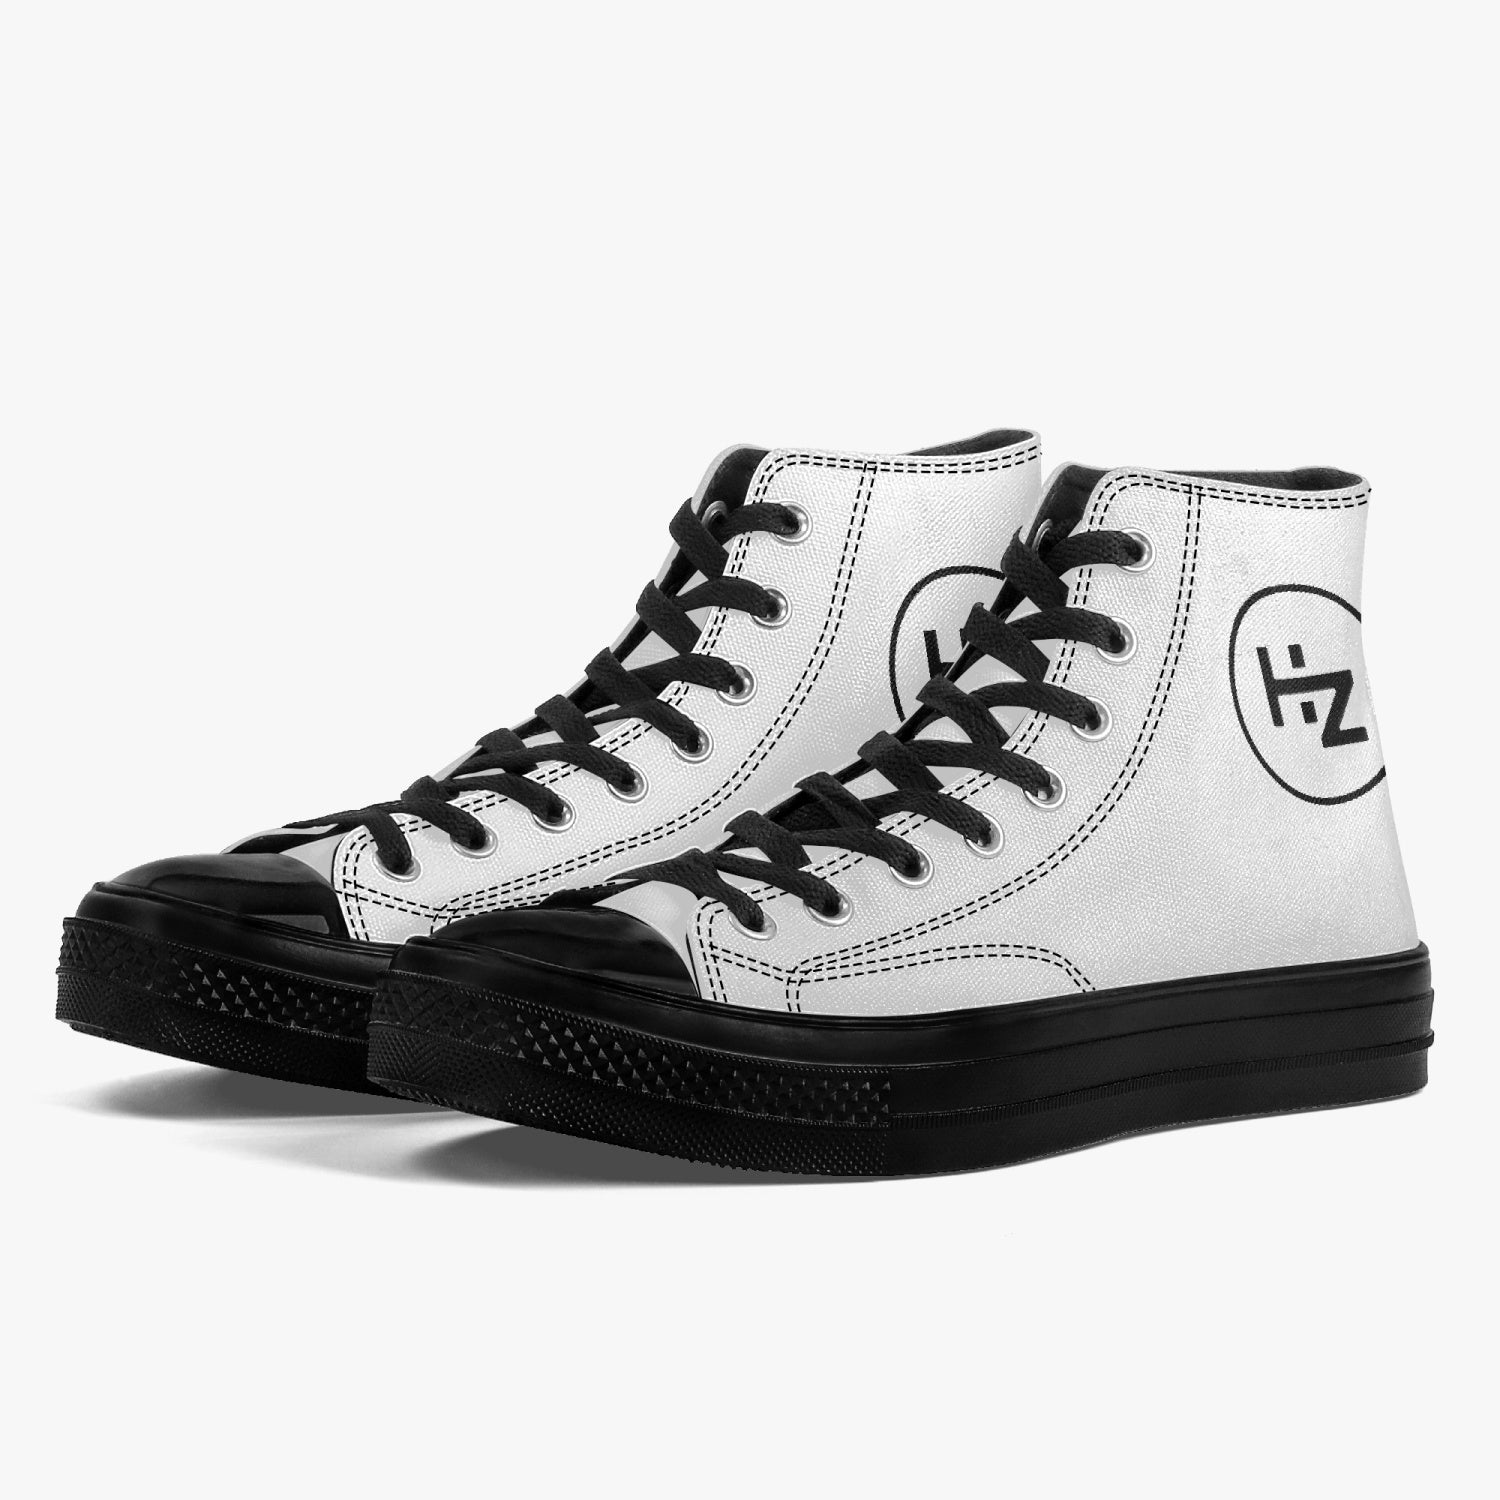 286. New High-Top Canvas Shoes - Black